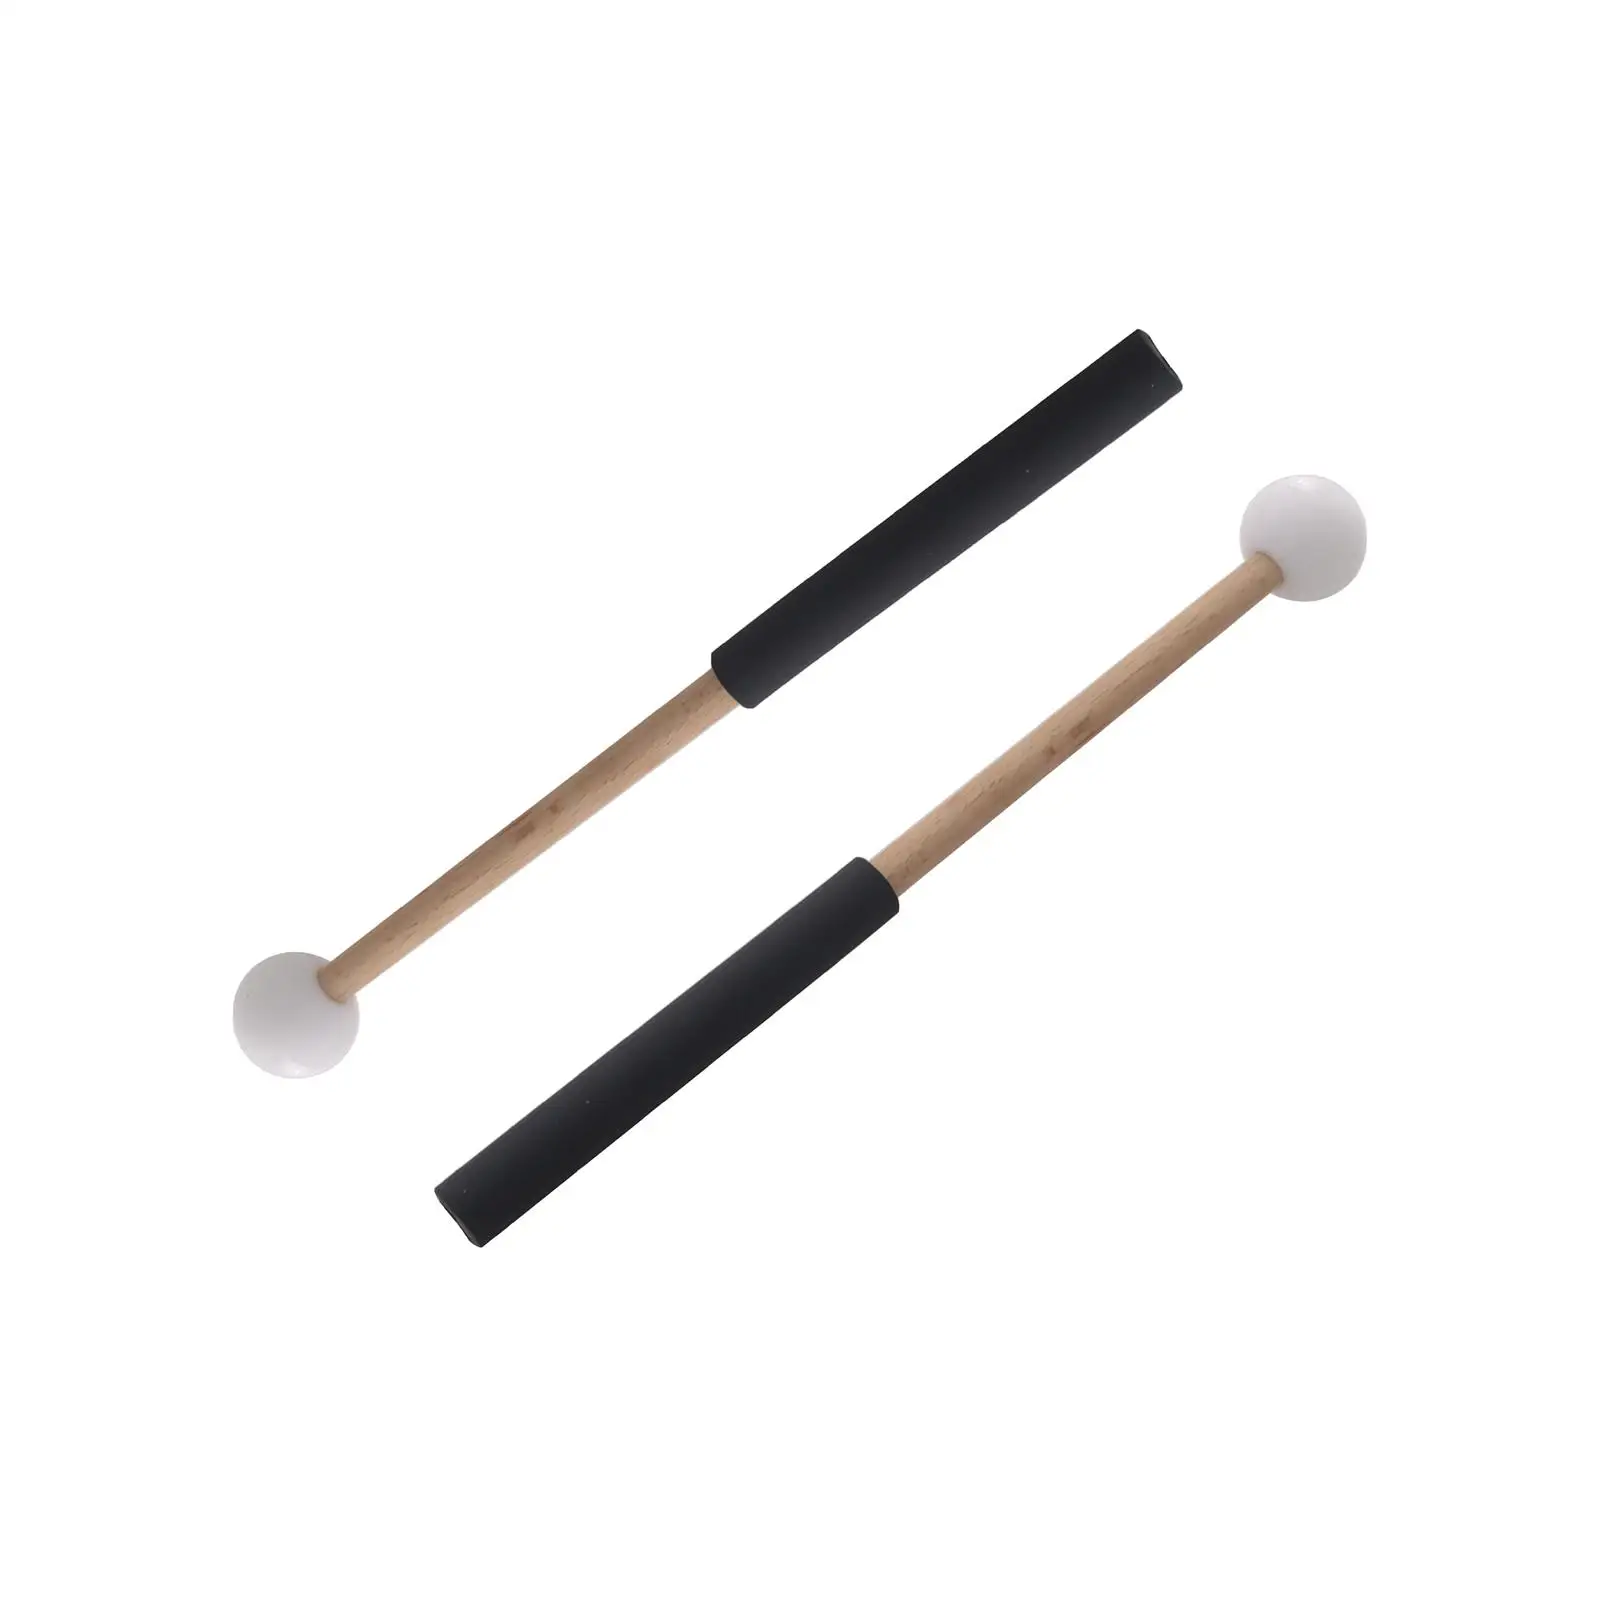 2x Wood Percussion Sticks Musical Drumstick with Wood Handle for Marimba